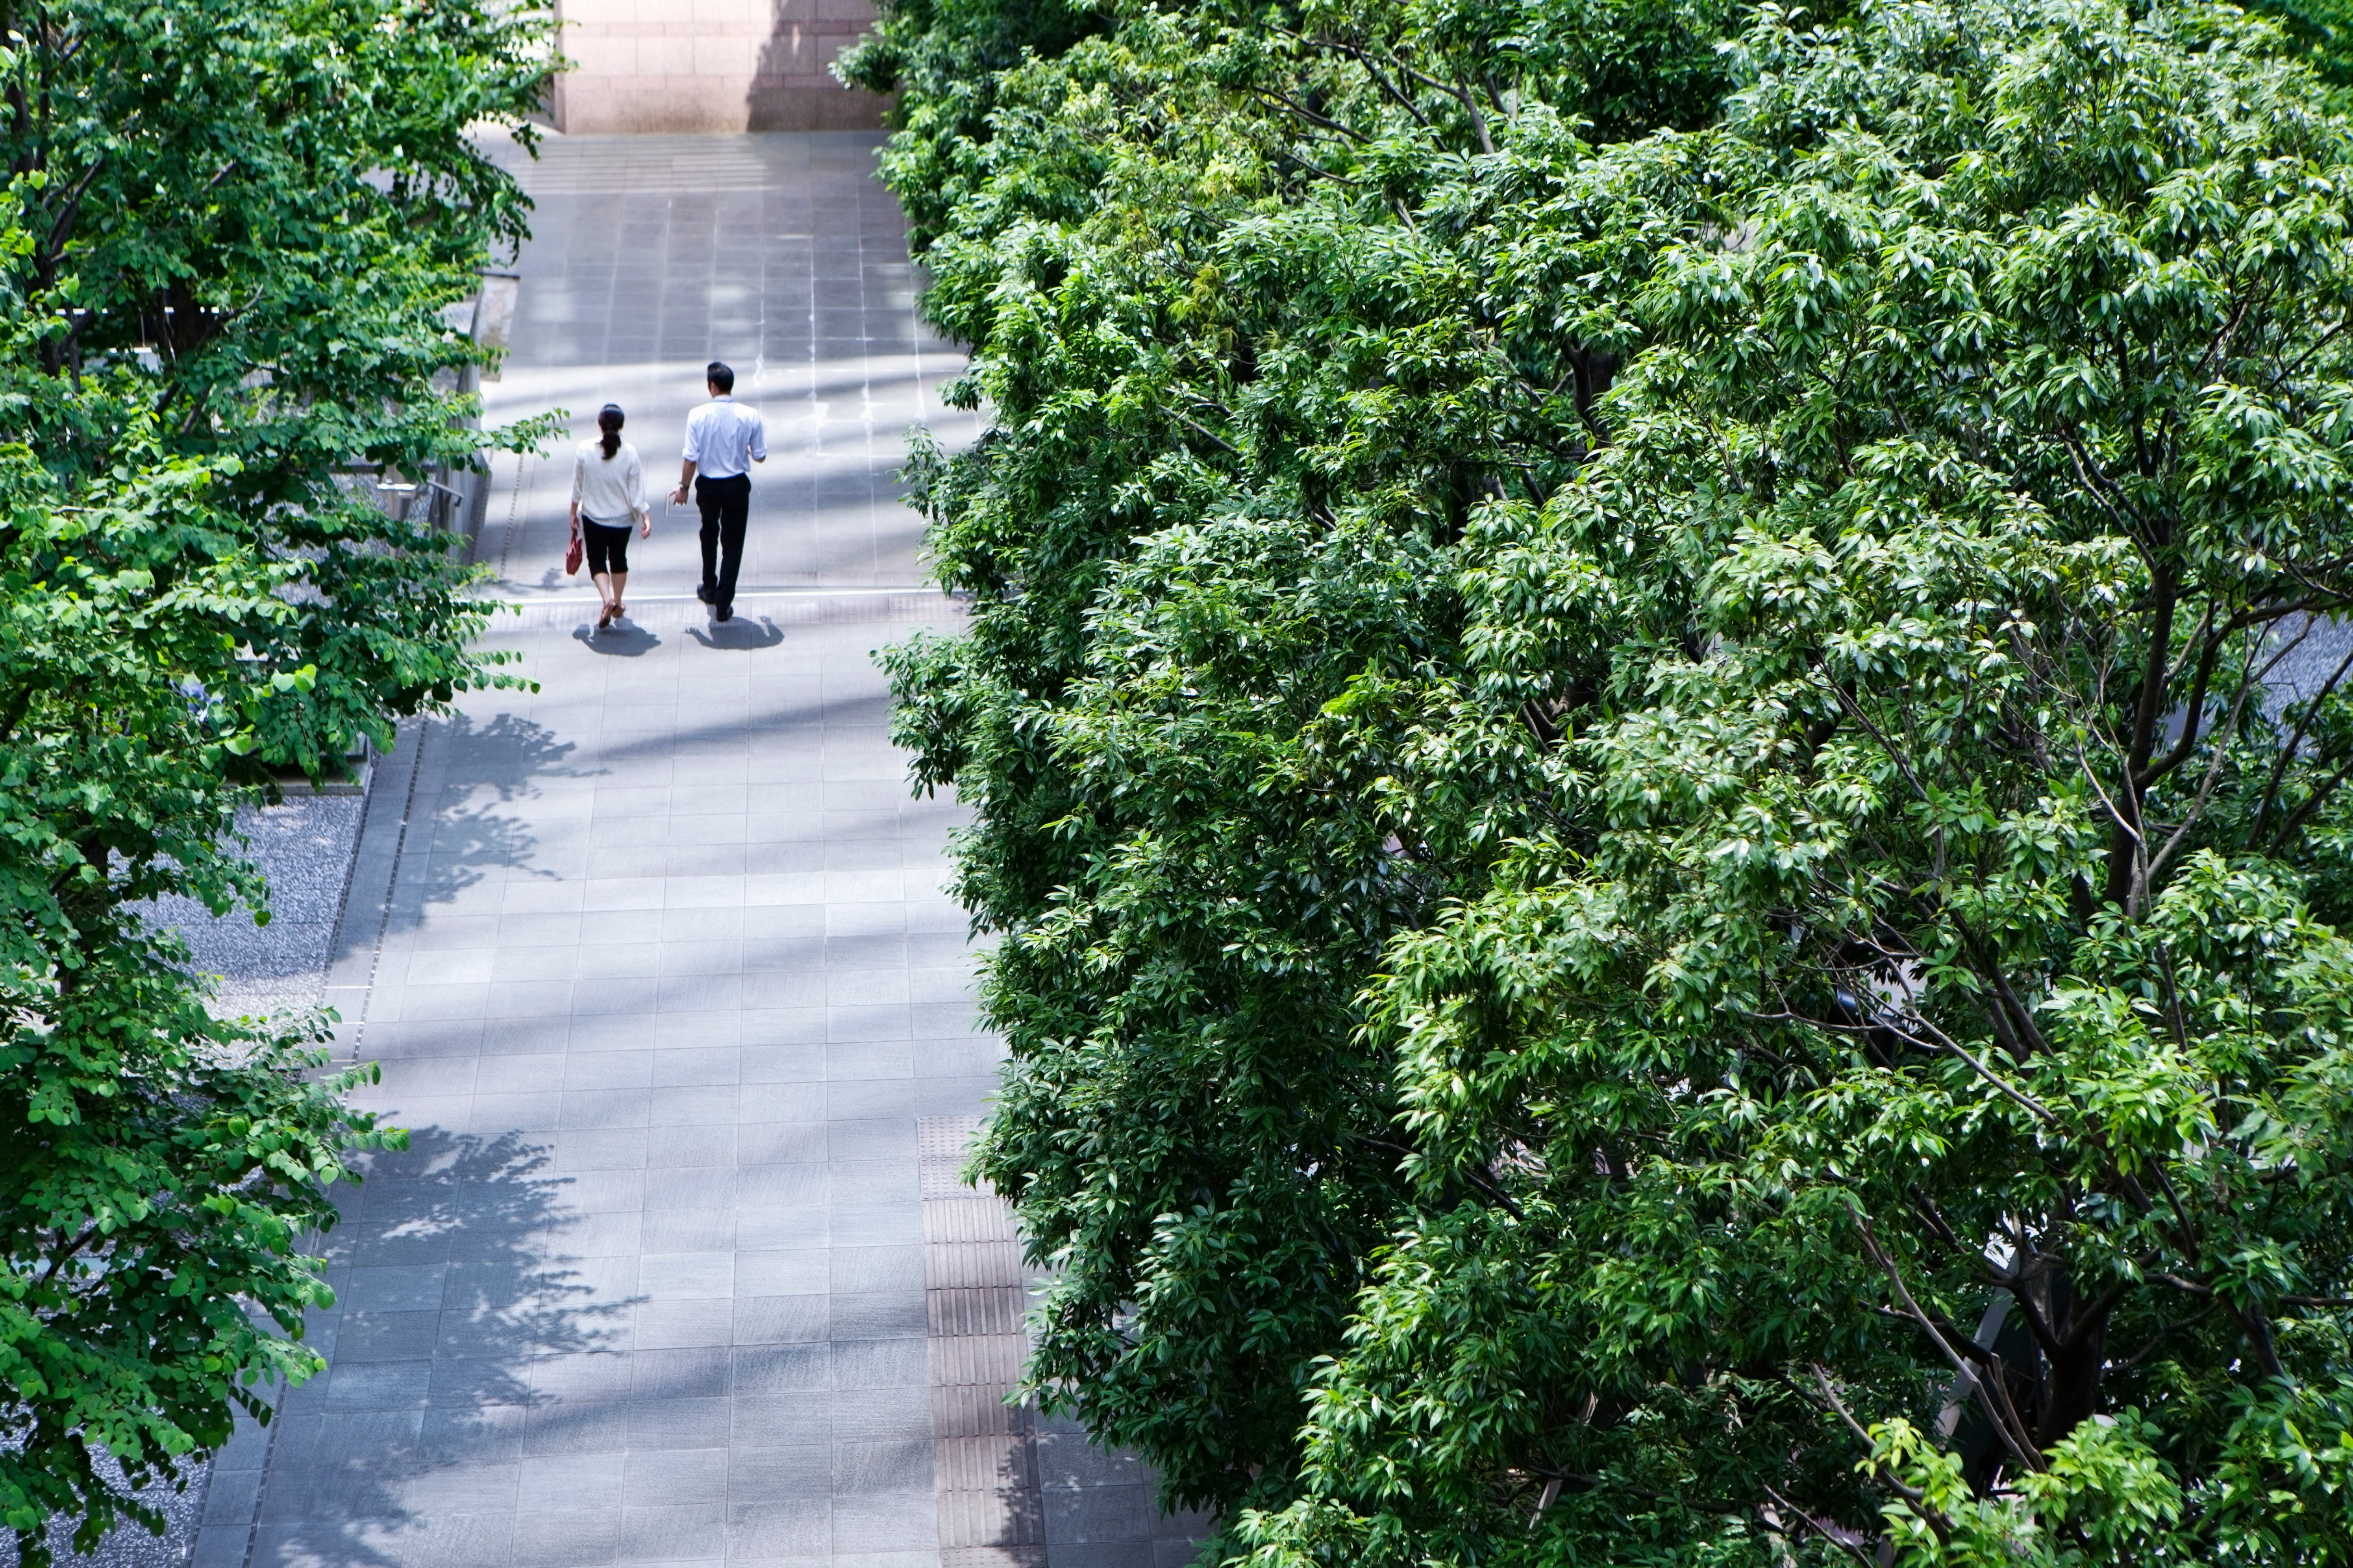 Two business professionals walking together on a walkway among trees.